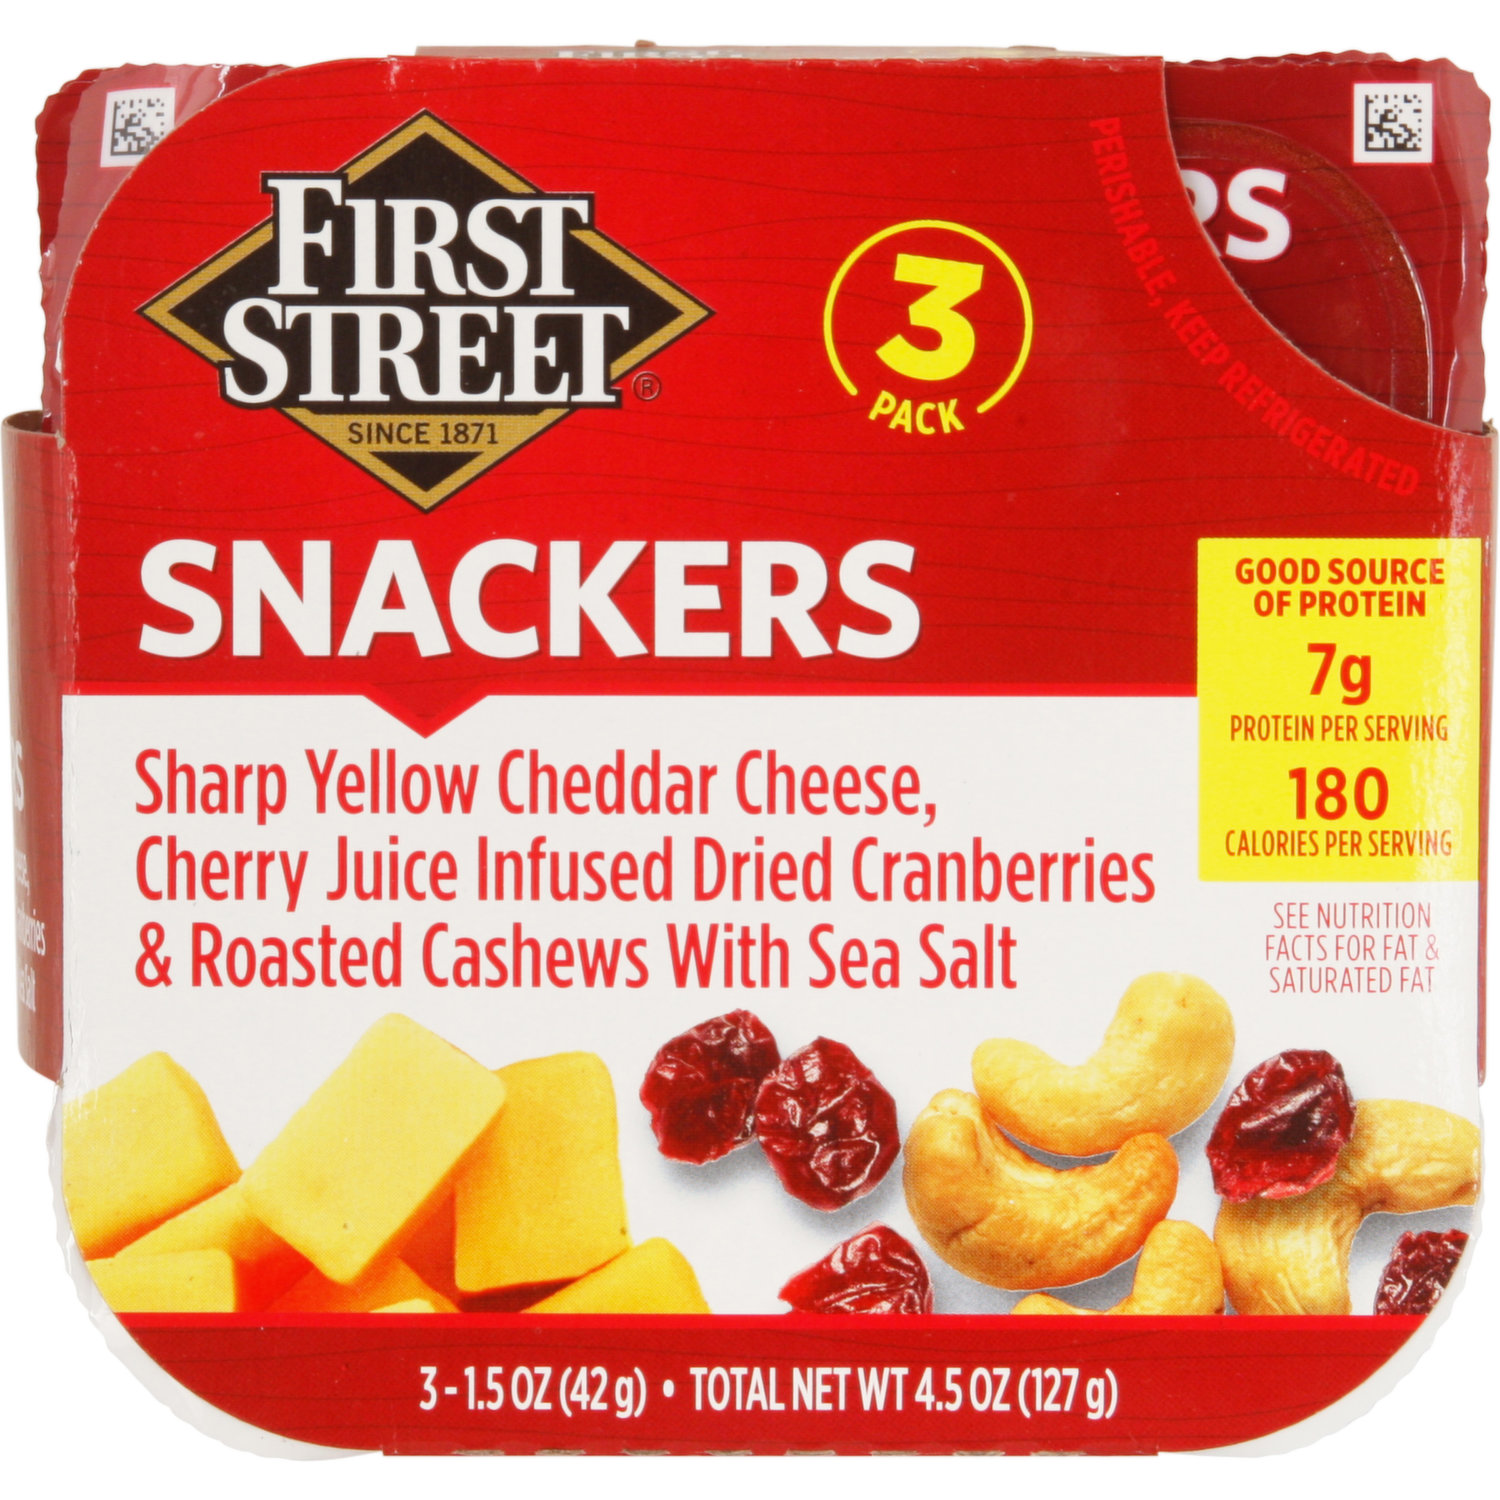 First Street Snackers, Cheddar Cheese, Dried Cranberries, Cashews 